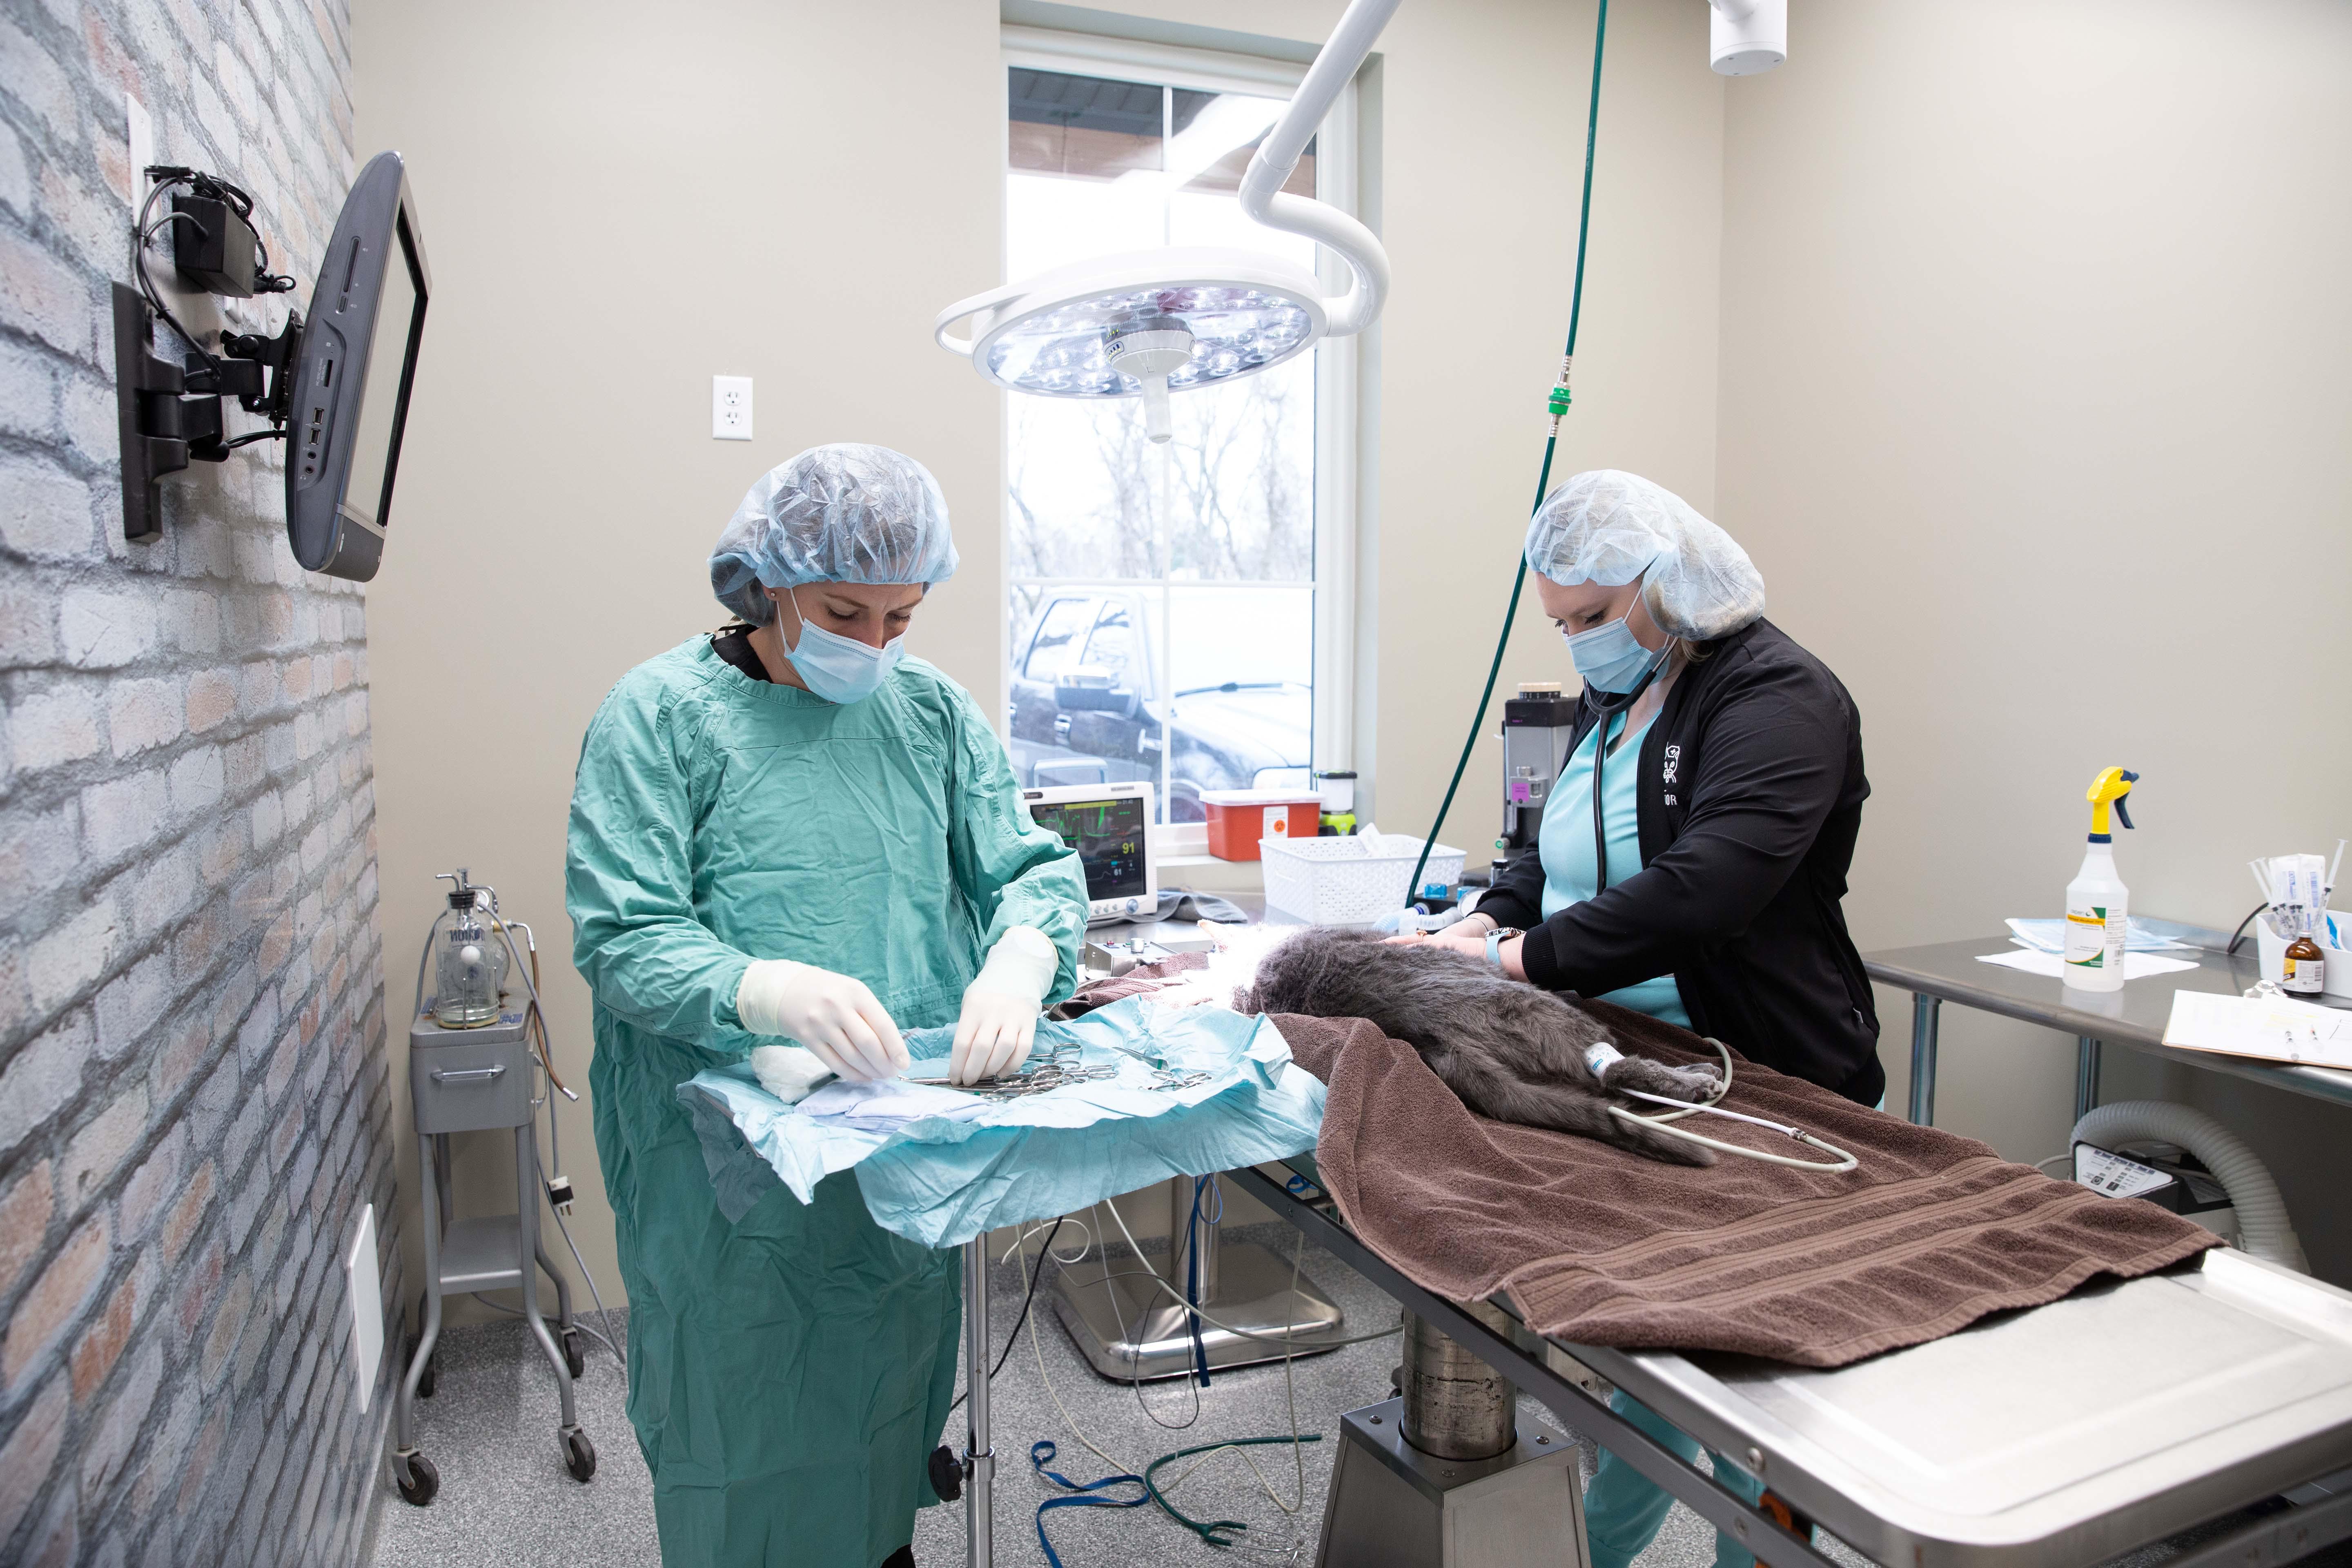 Our medical team is highly experienced in a wide range of surgical procedures.